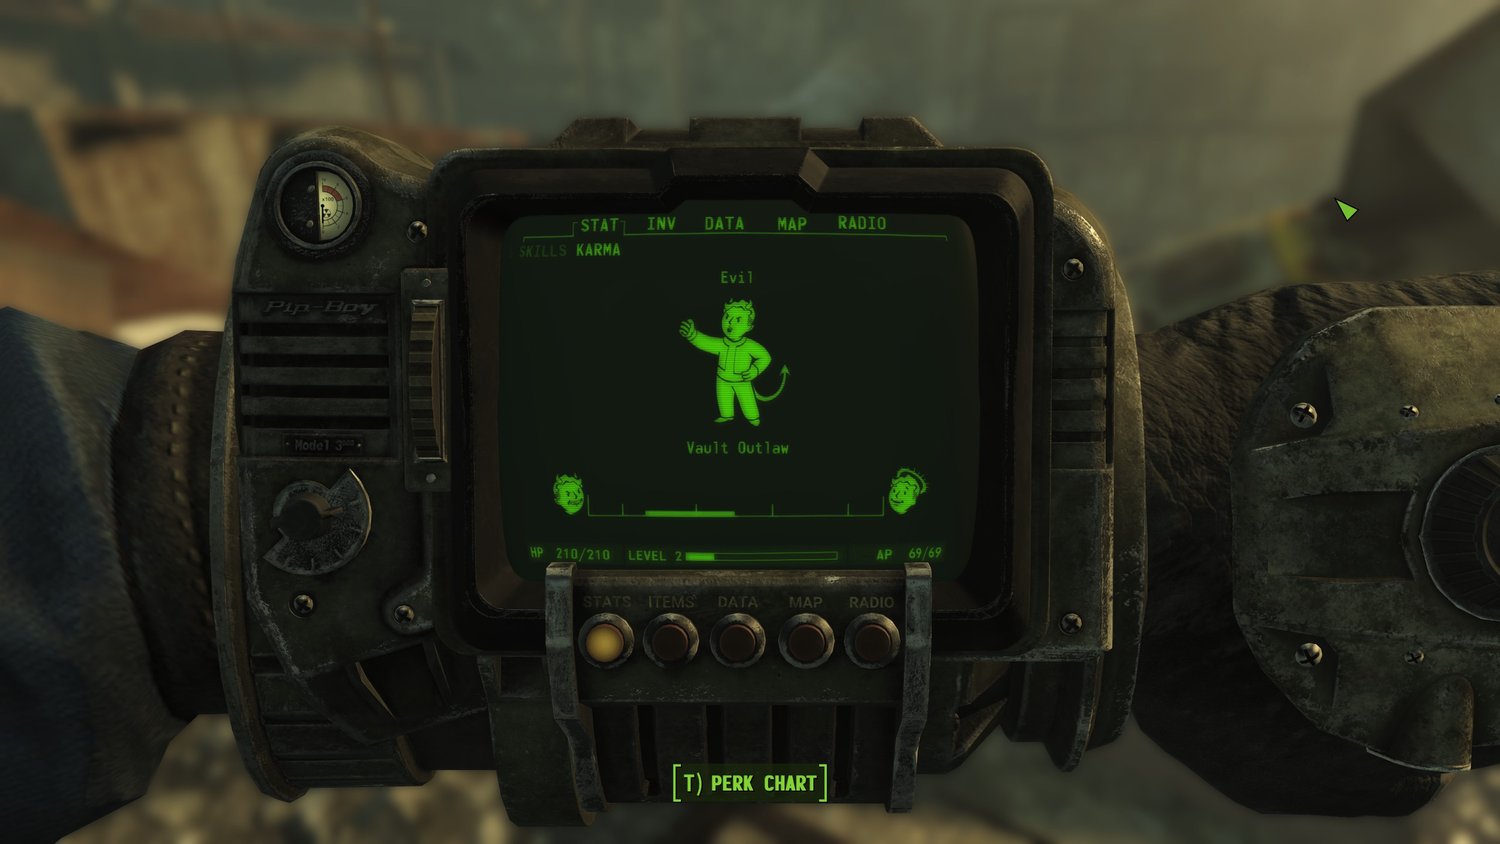 Fallout 4: The Capital Wasteland